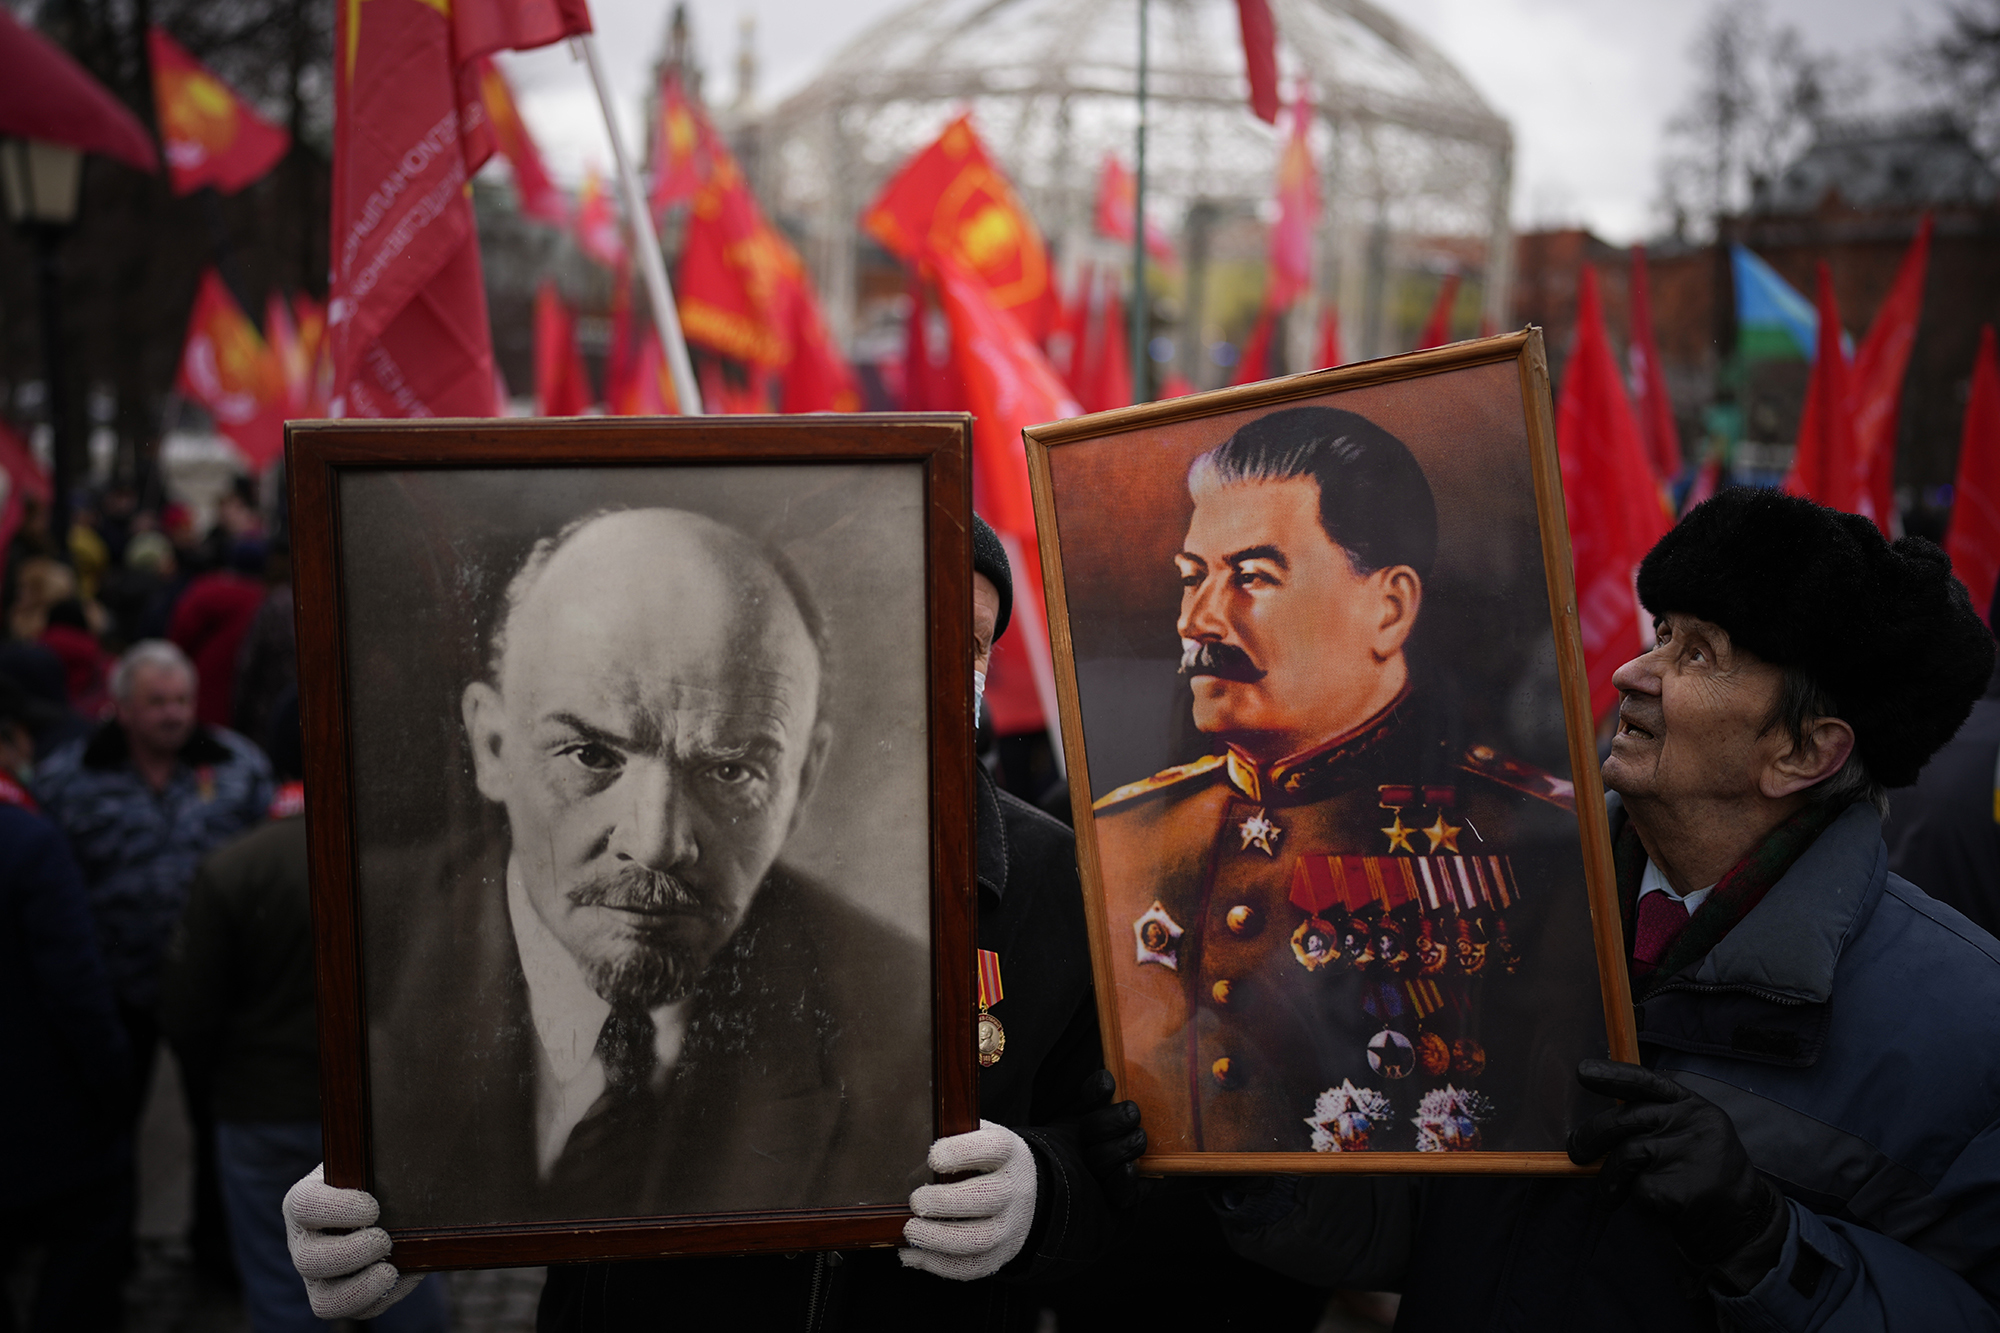 One person holds a framed image of Vladimir Lenin and another holds one of Josef Stalin as others wave red flags behind them in Moscow's Revolution Square.